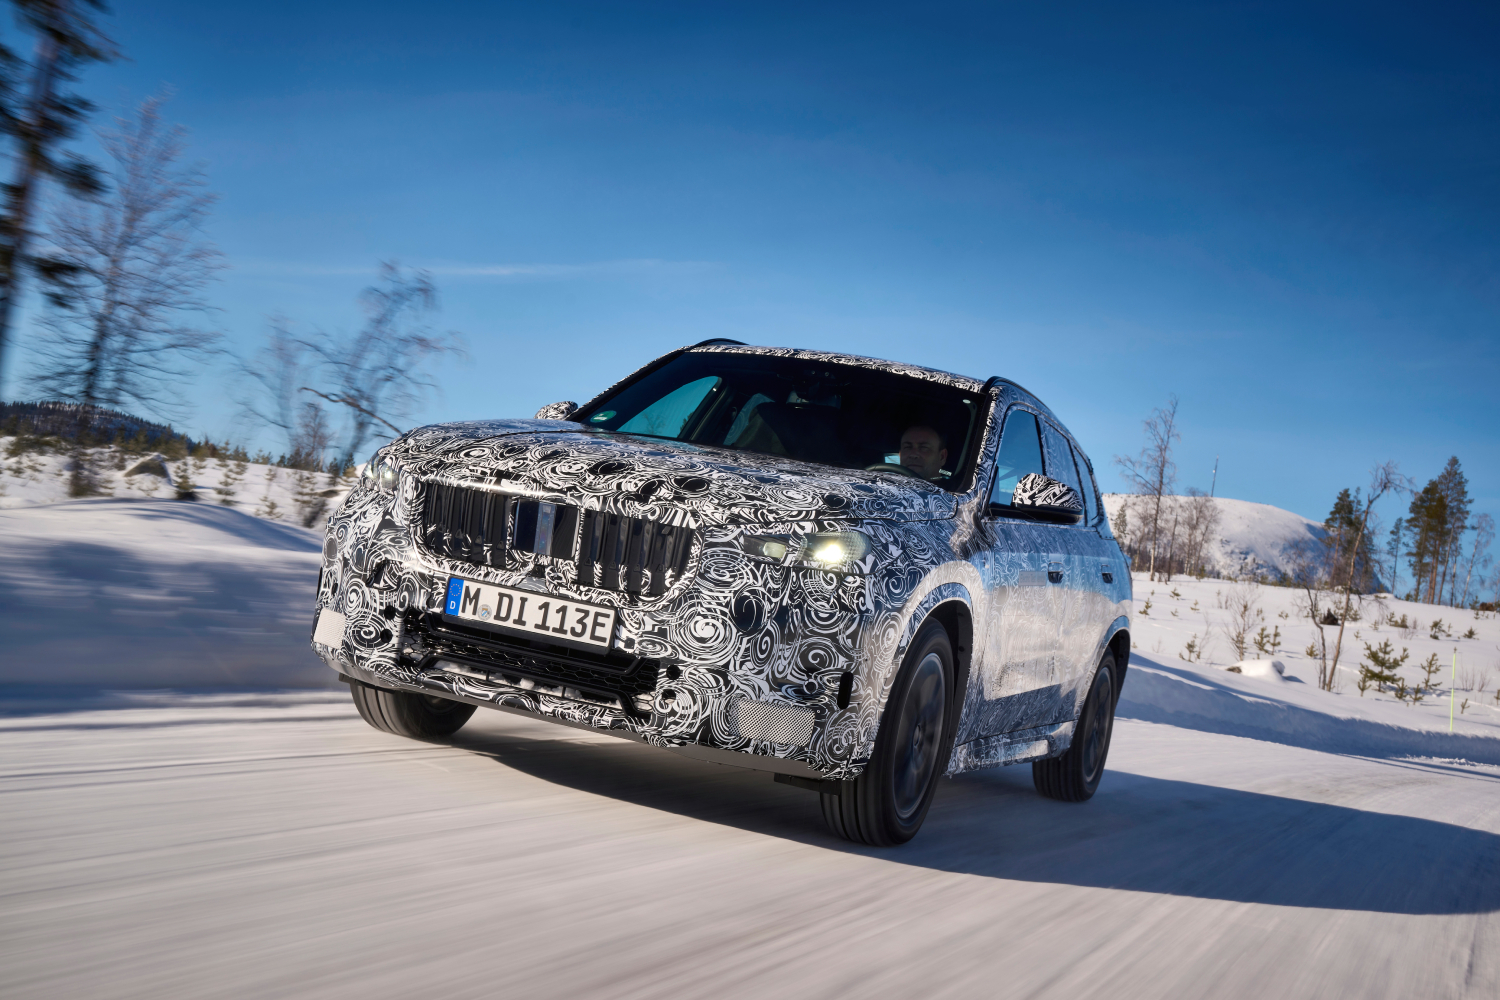 The 2023 BMW iX1 and BMW X1 luxury SUV have leaked